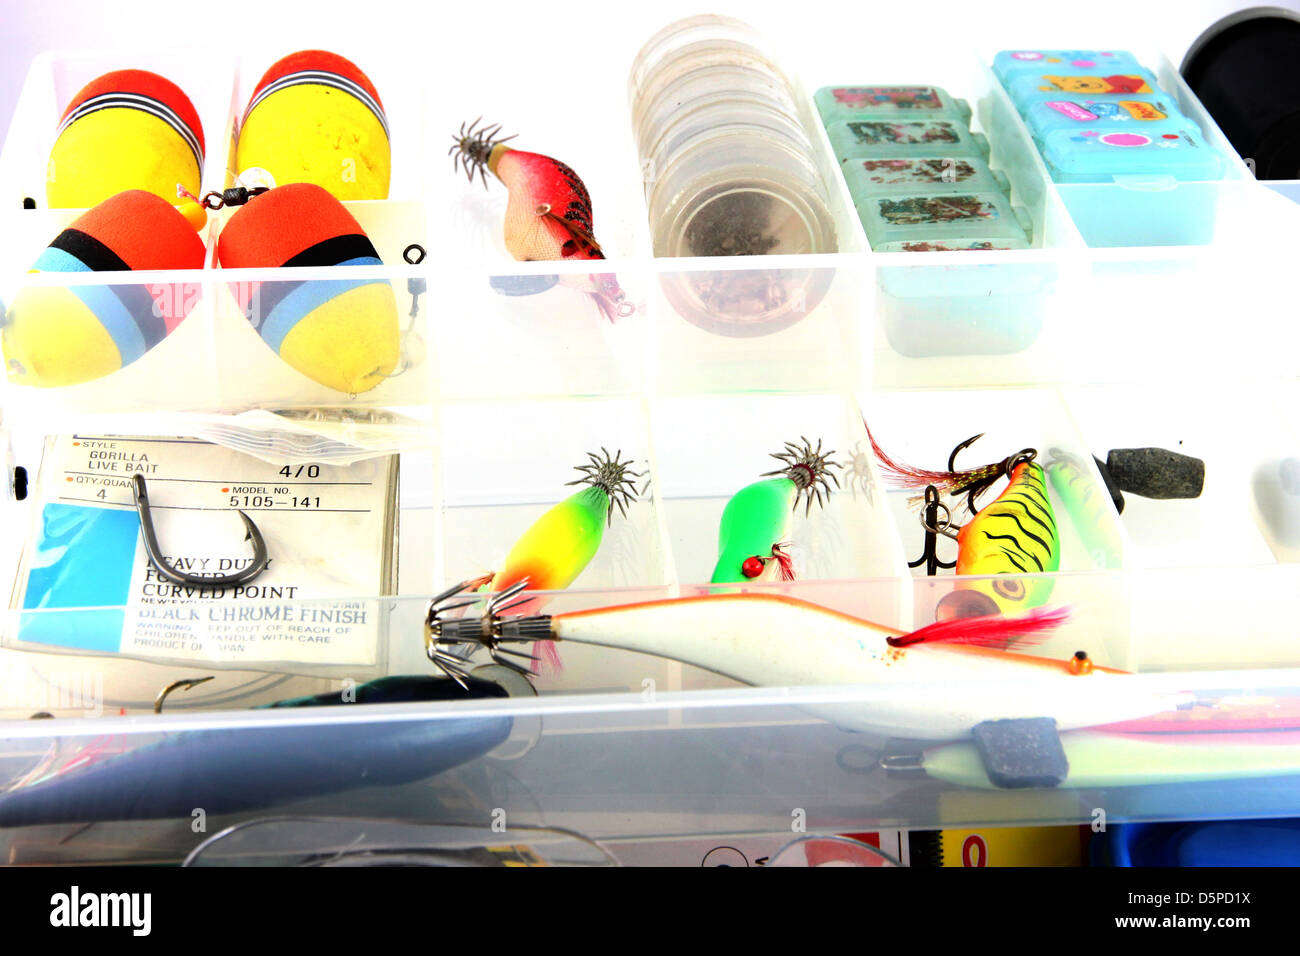 Pin by fateme mohebbi on hodhod2  Wooden sewing box, Fishing tackle box,  Fly fishing tackle